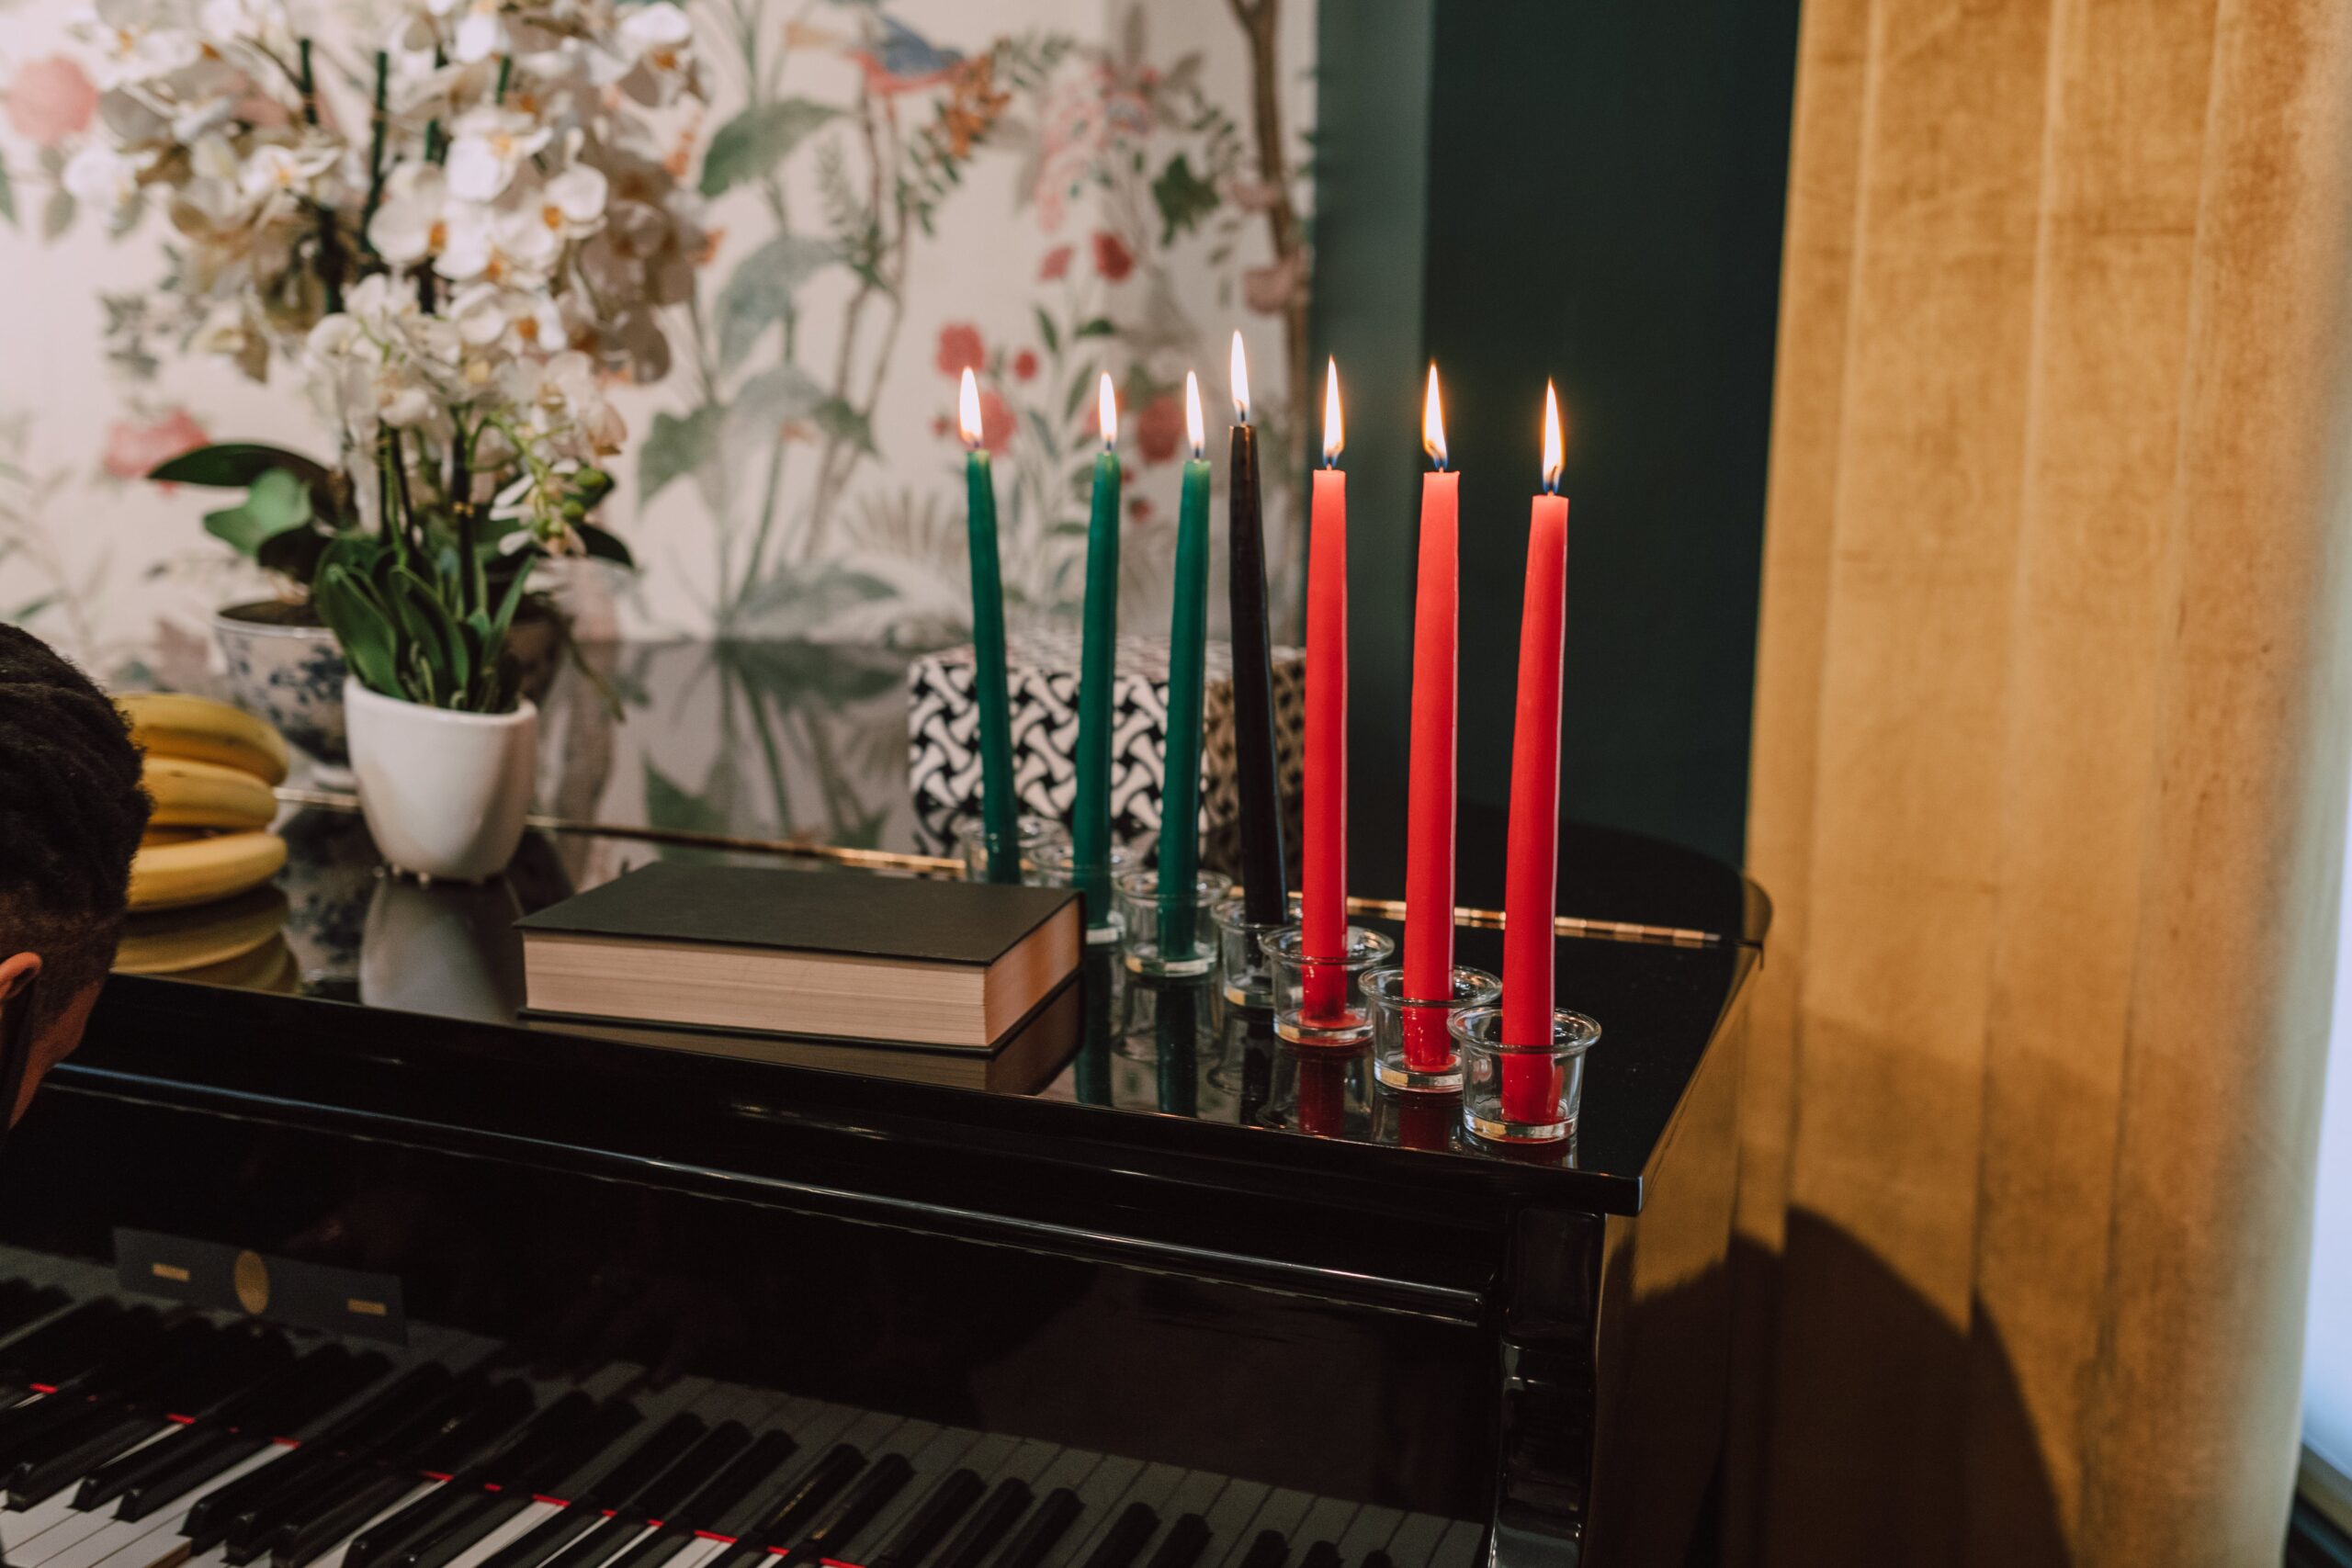 Use candles, throw pillows, blankets, vases, baskets and more in Kwanzaa colors to decorate your home this holiday season. Pictured: Kwanzaa candles on top of a piano.